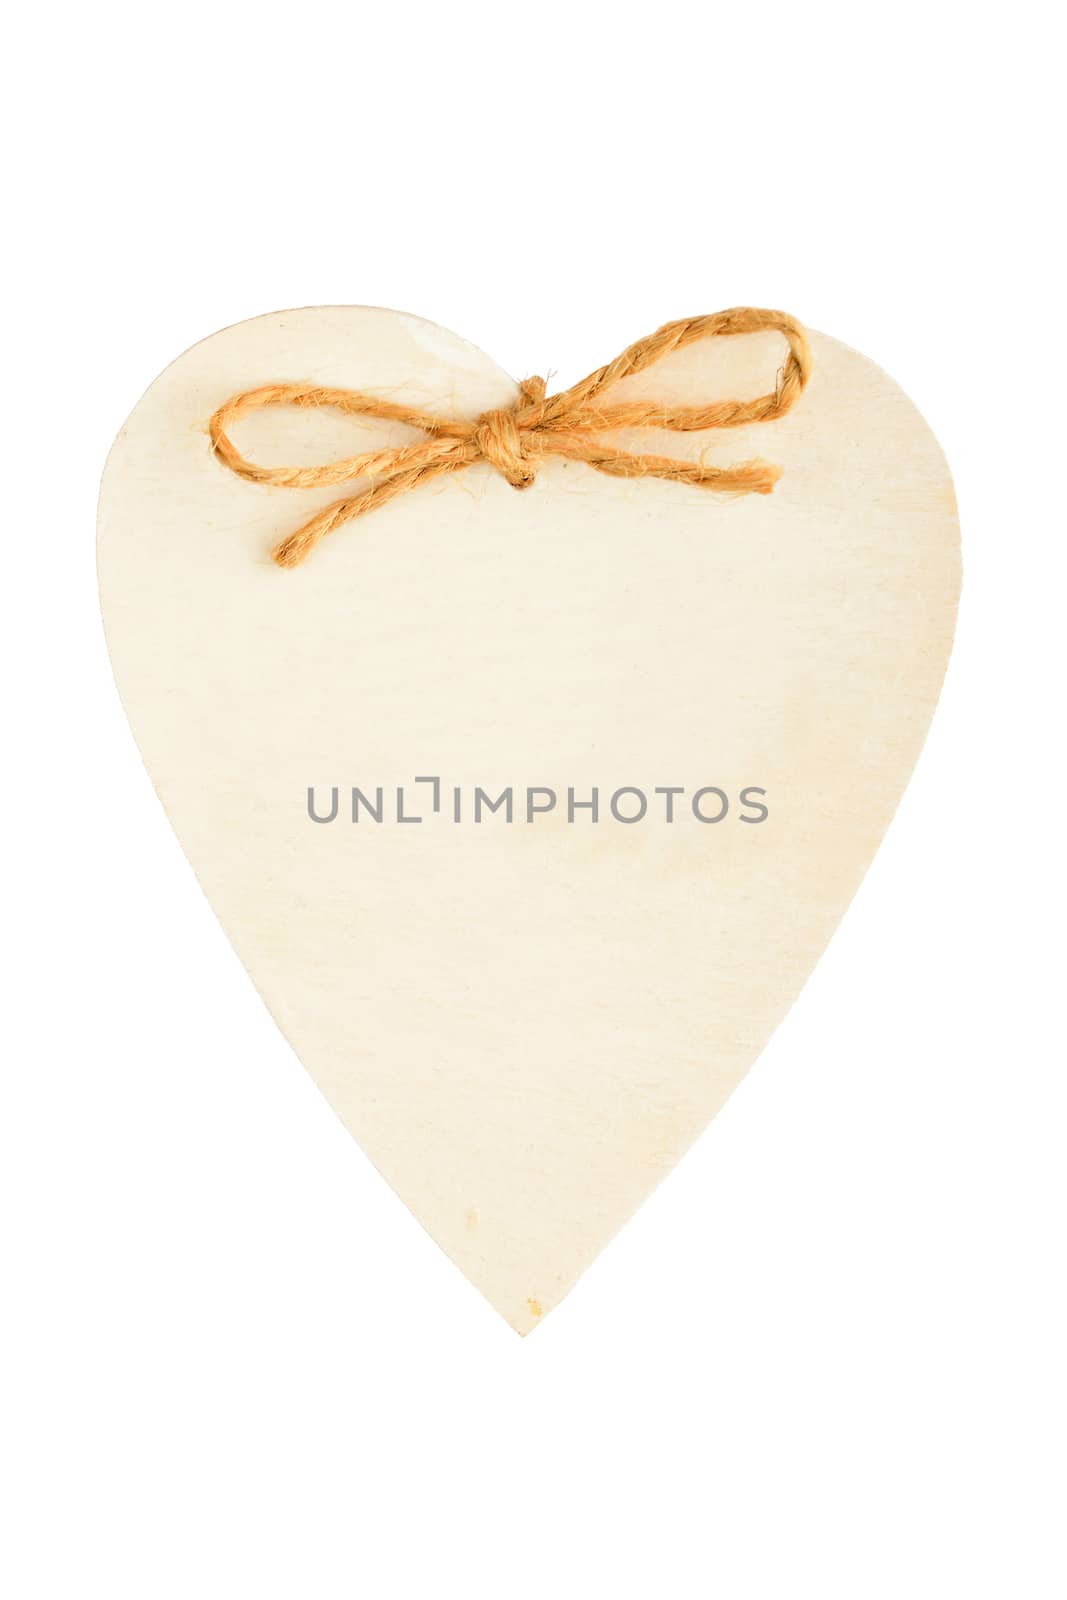 Beige painted romantic wooden handmade souvenir heart with burlap jute rope and copy space isolated on white